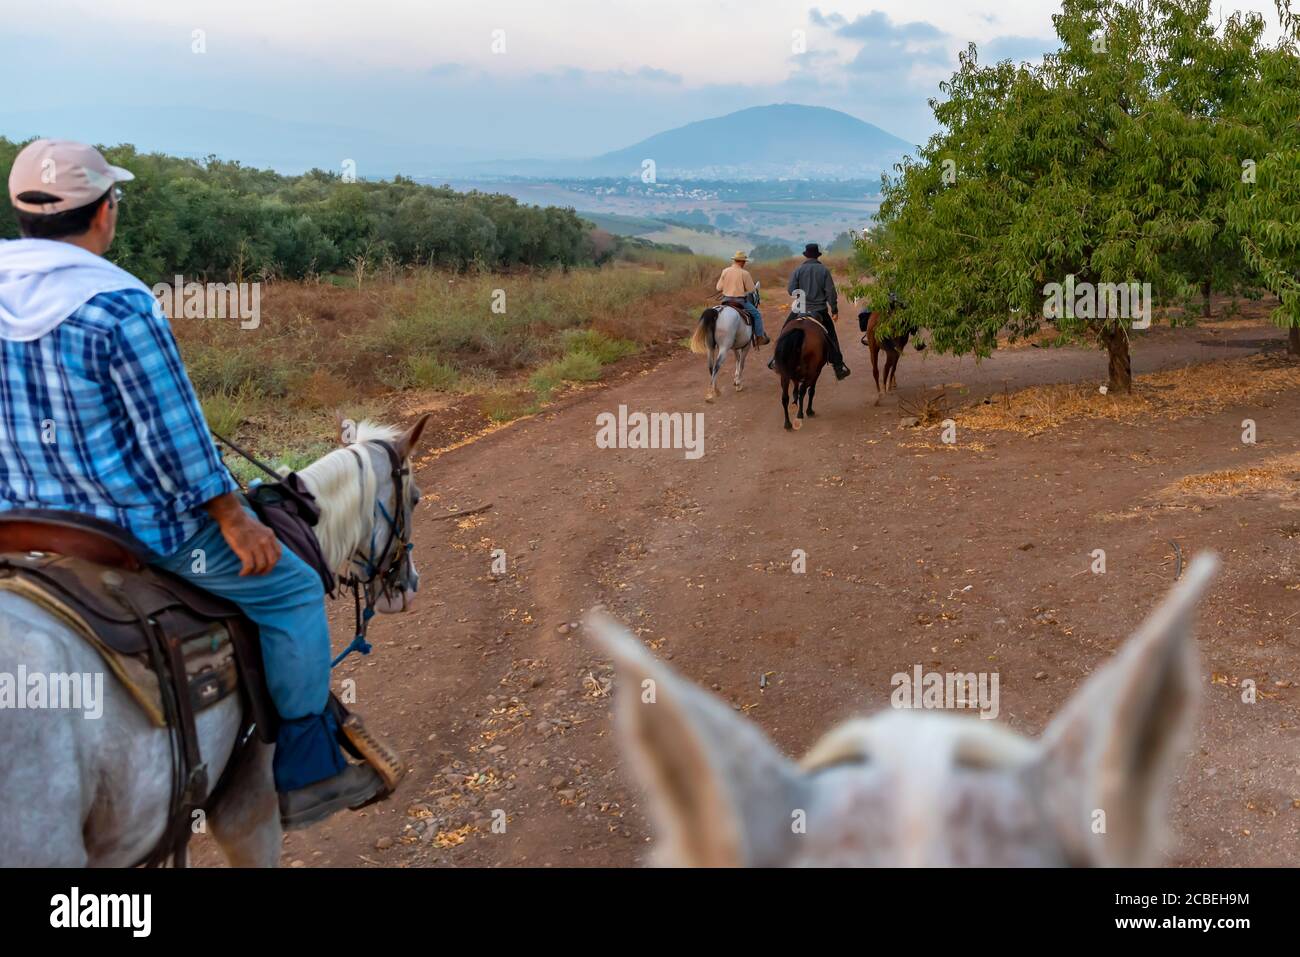 Horse back riding in the Jezreel Valley, Israel. Mount Tabor can be seen in the background Stock Photo